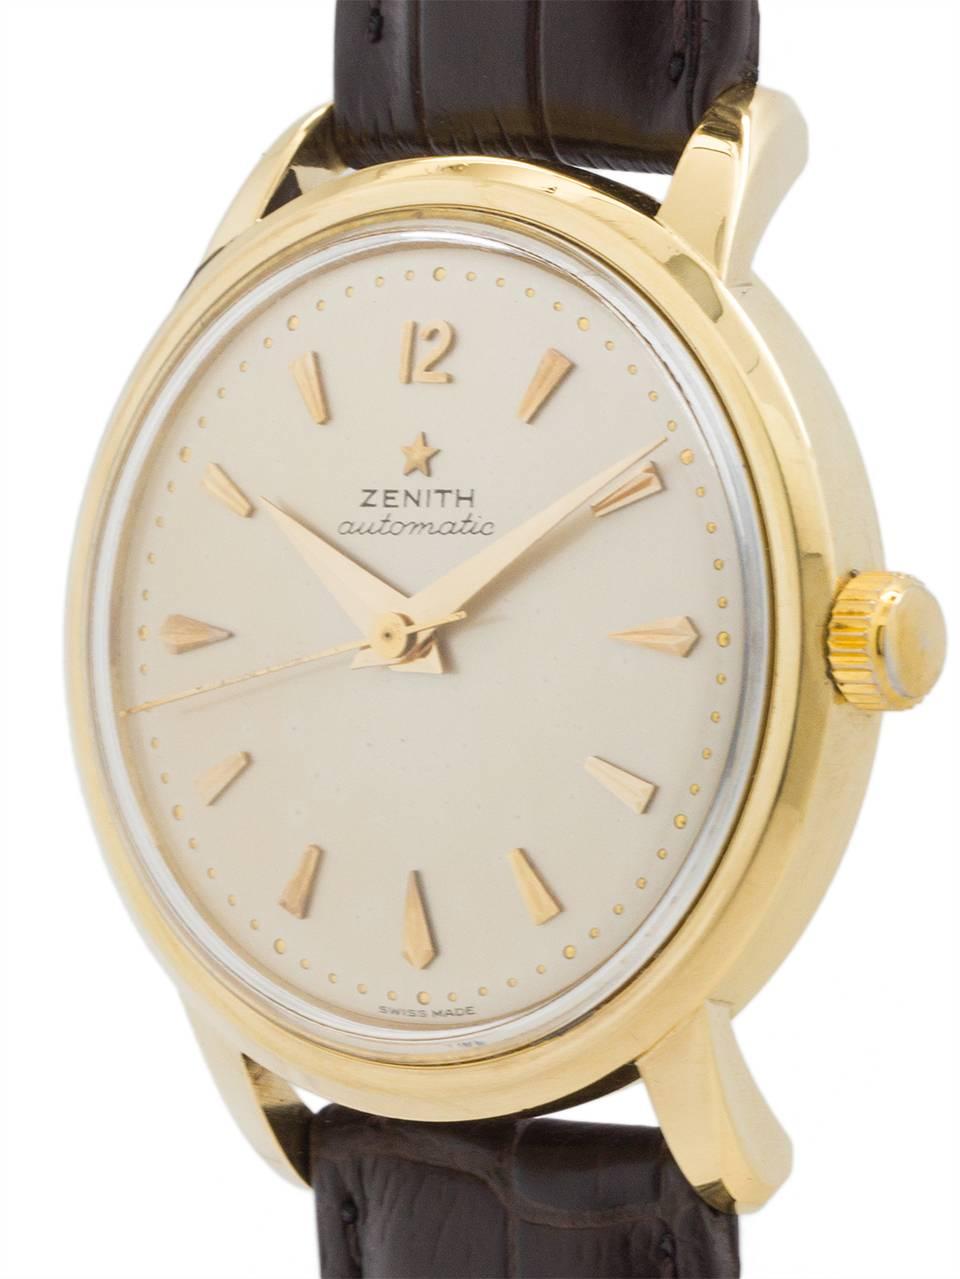 
Scarce and very collectible Zenith 18K gold automatic dress model powered by with highly regarded calibre 133.8 chronometer movement circa 1958. This is a beefy 35 x 41mm heavy gold case,with a beautiful condition original matte silvered dial with